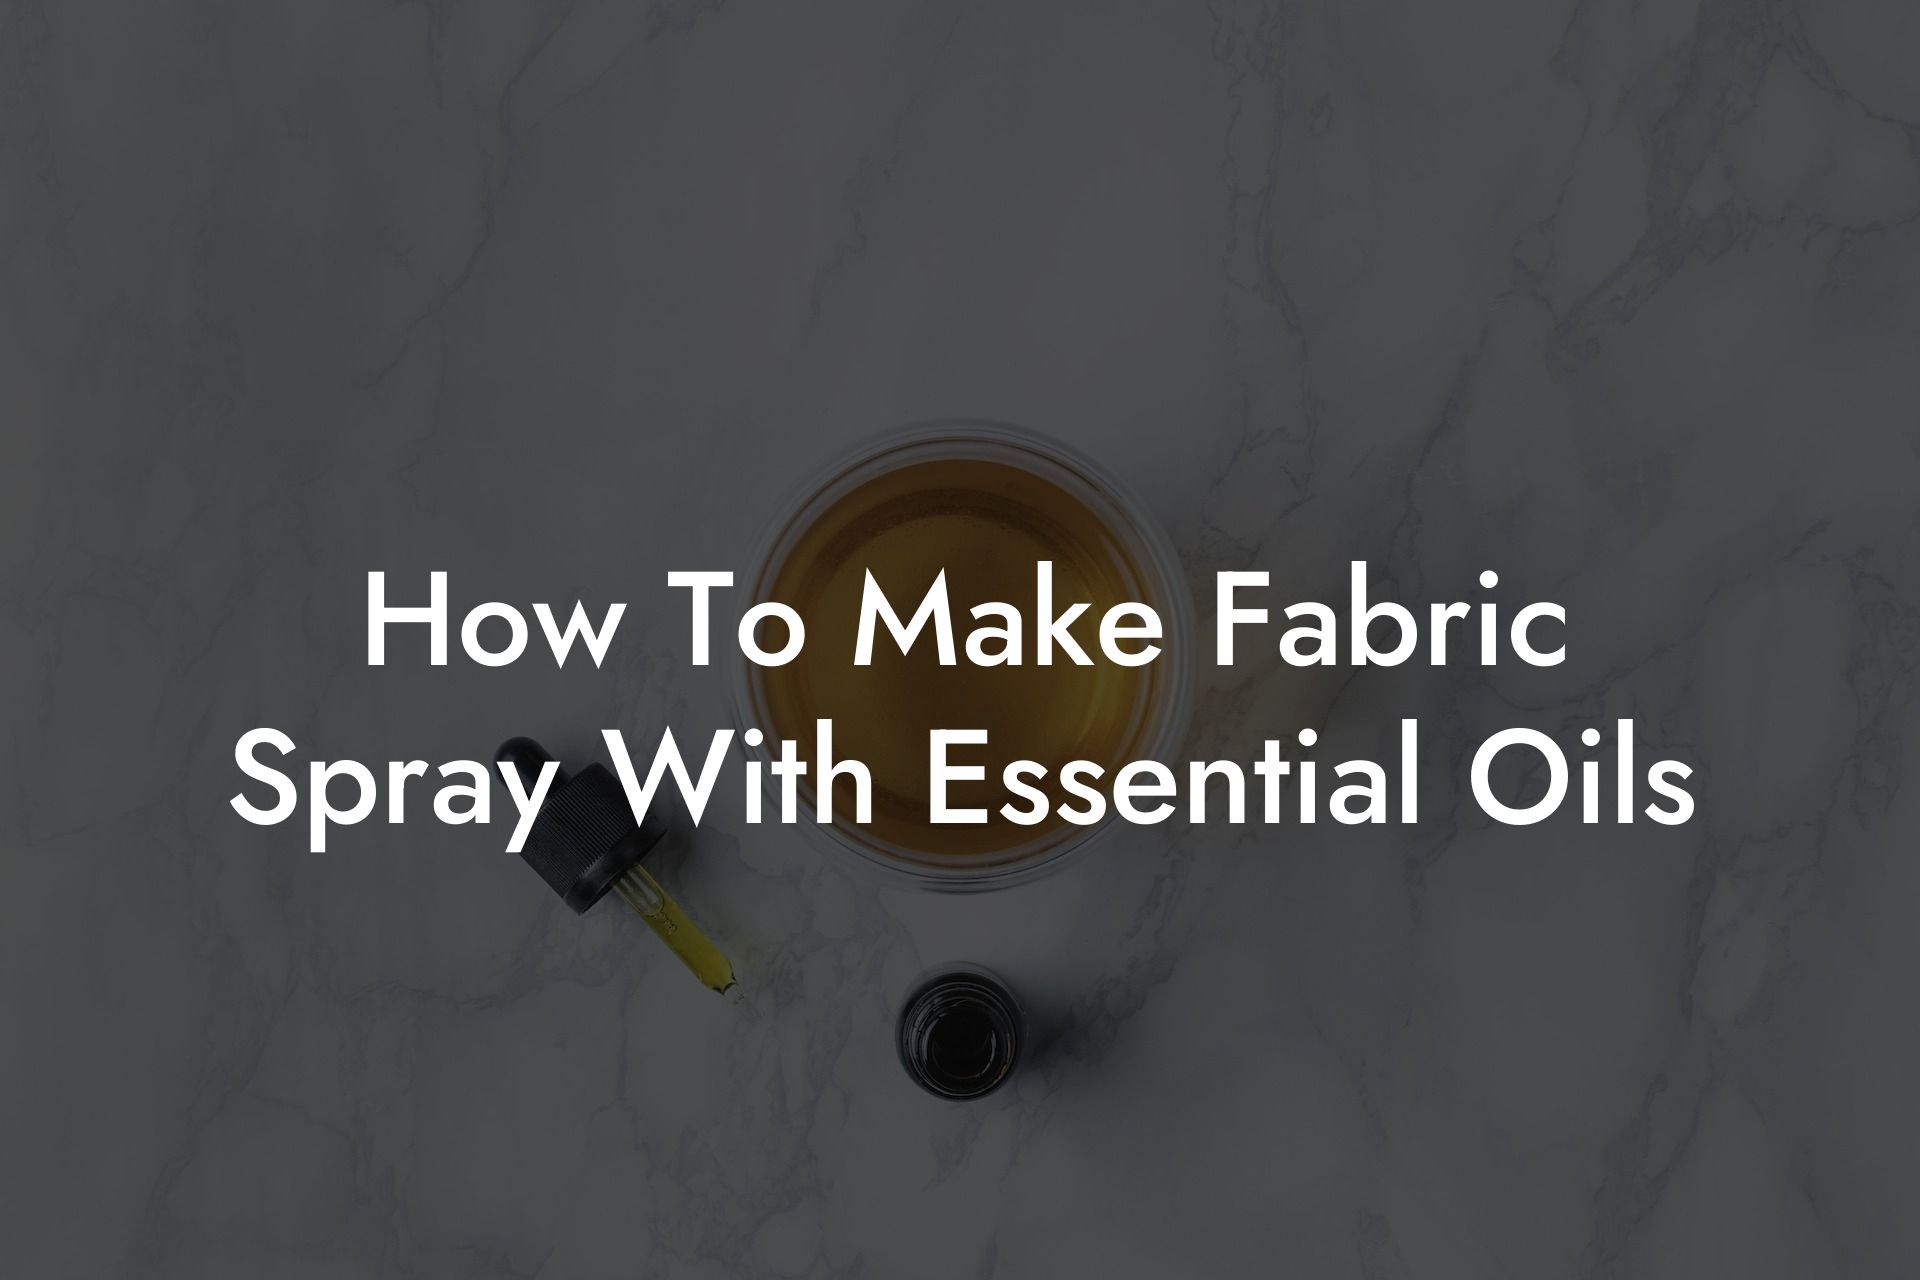 How To Make Fabric Spray With Essential Oils